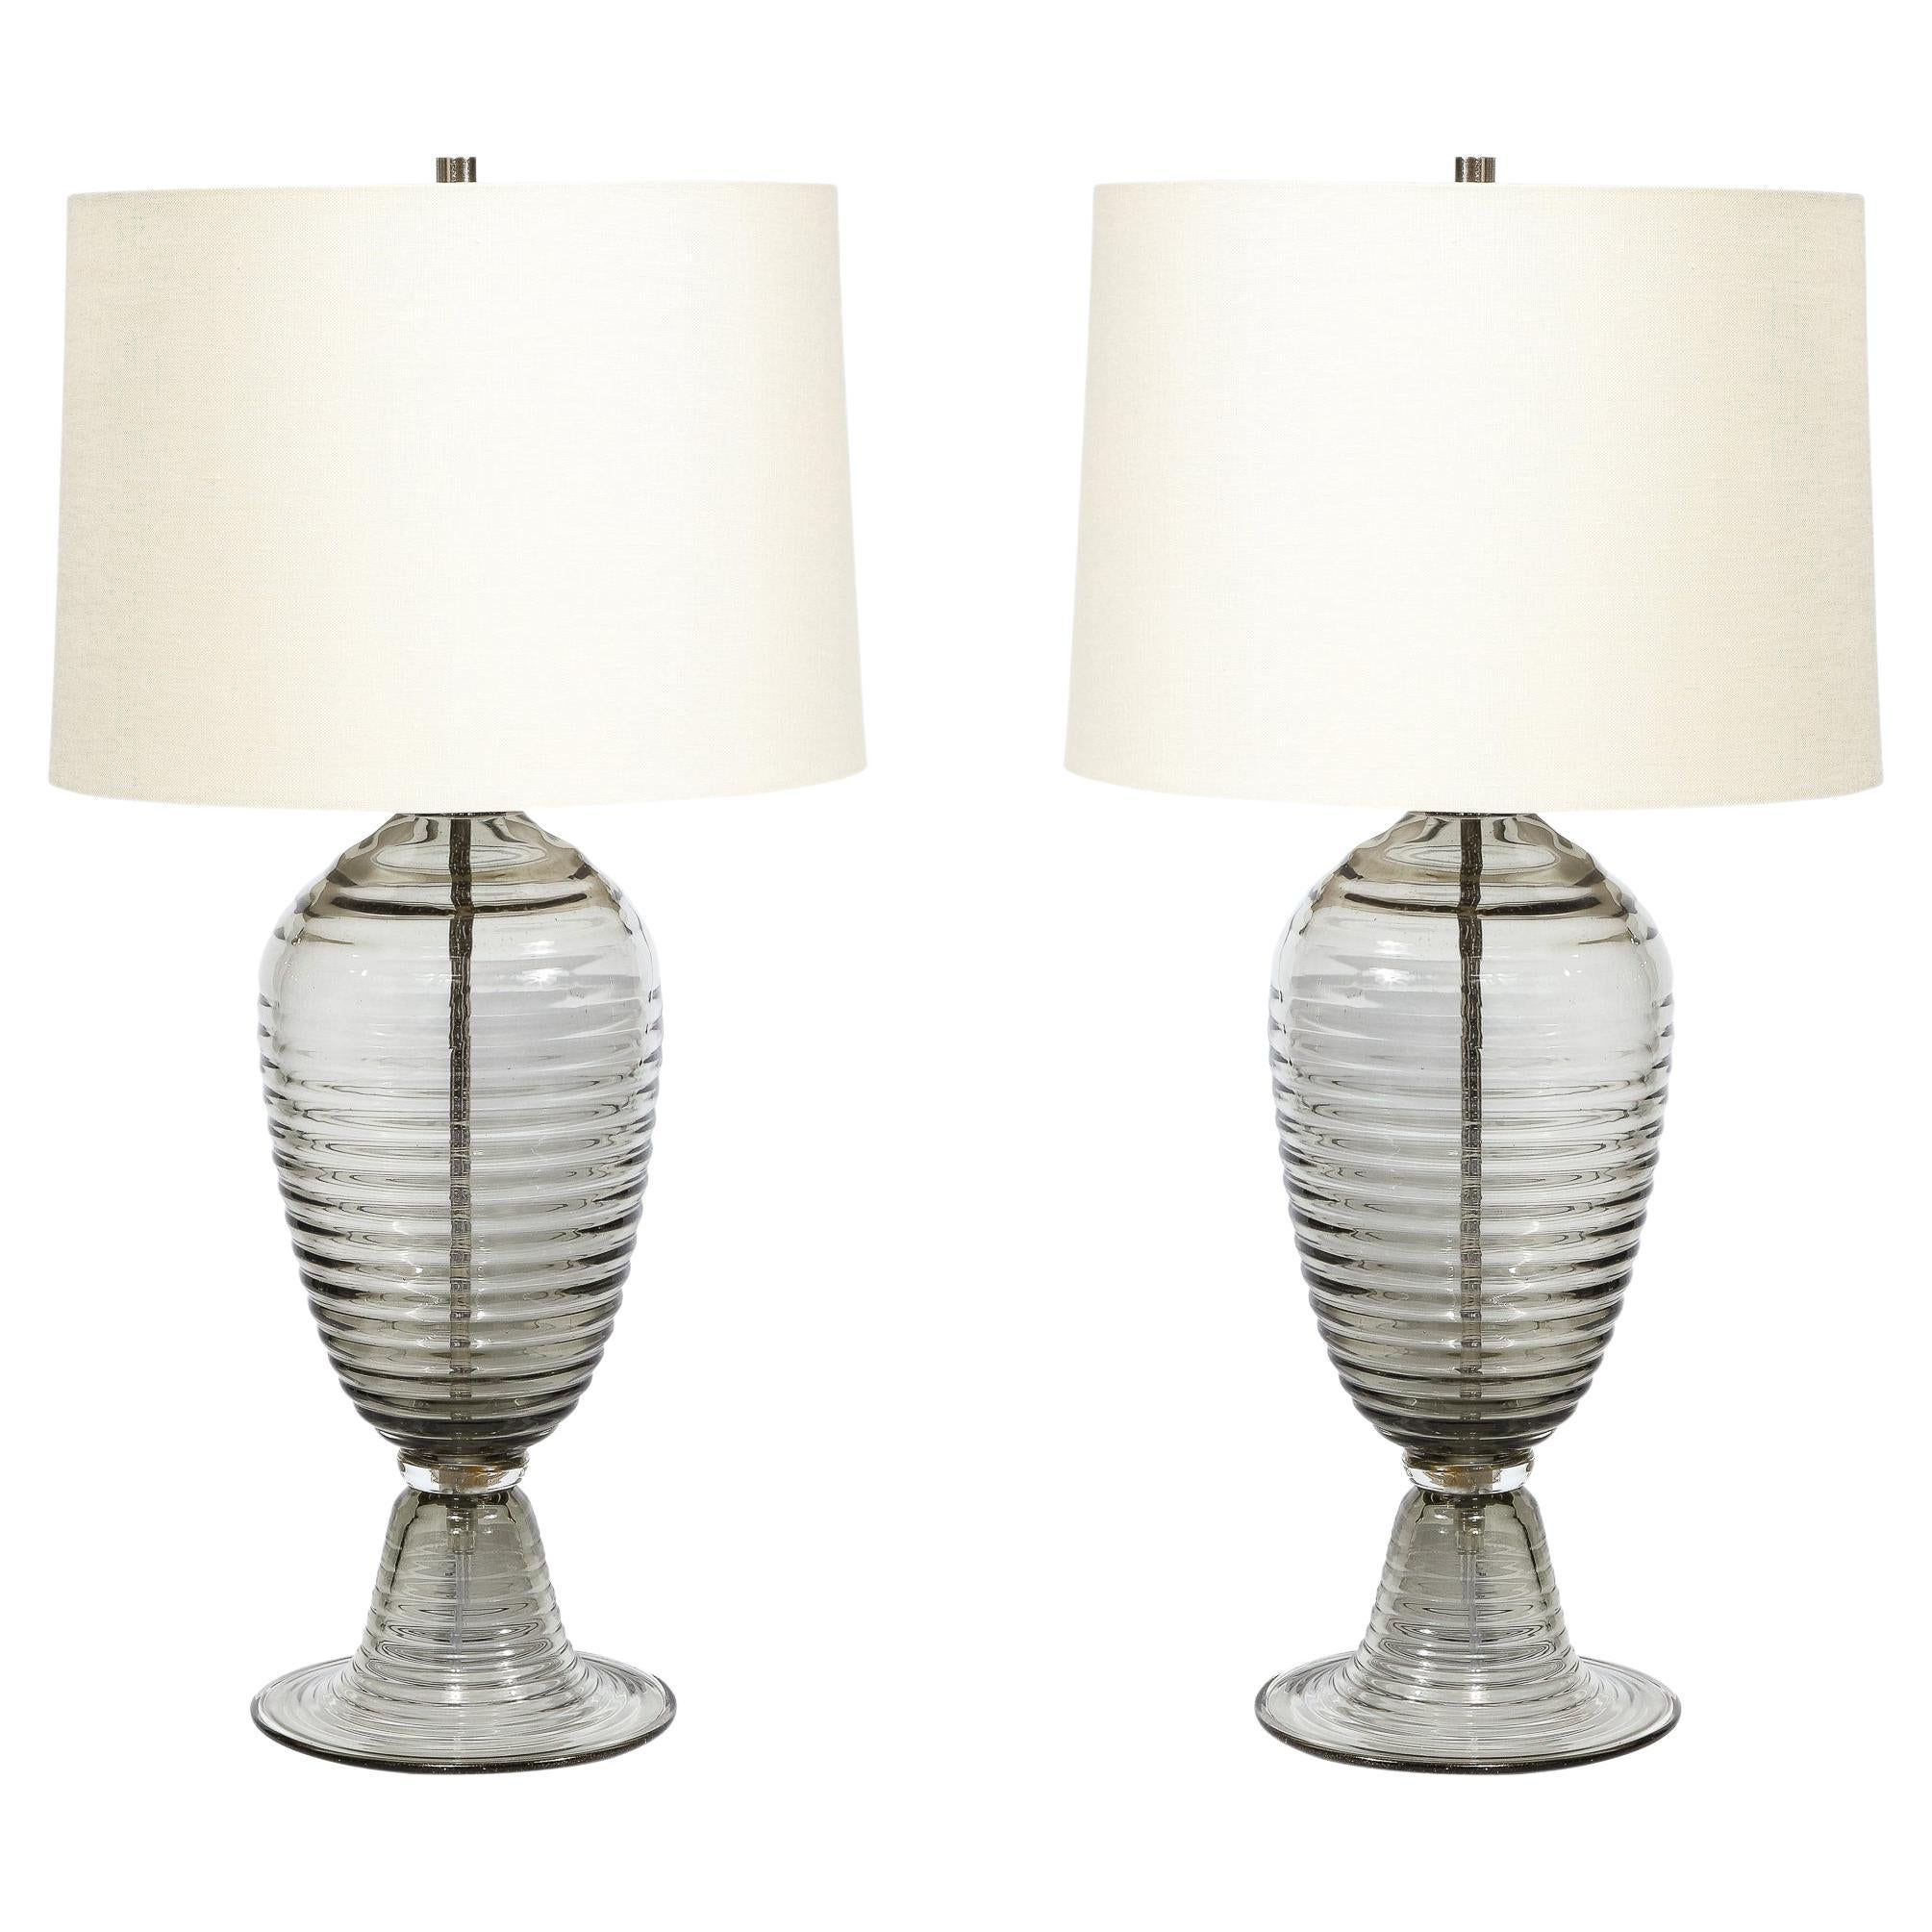 Modernist Art Deco Style Hive Form Hand-Blown Murano Smoked Glass Table Lamps For Sale